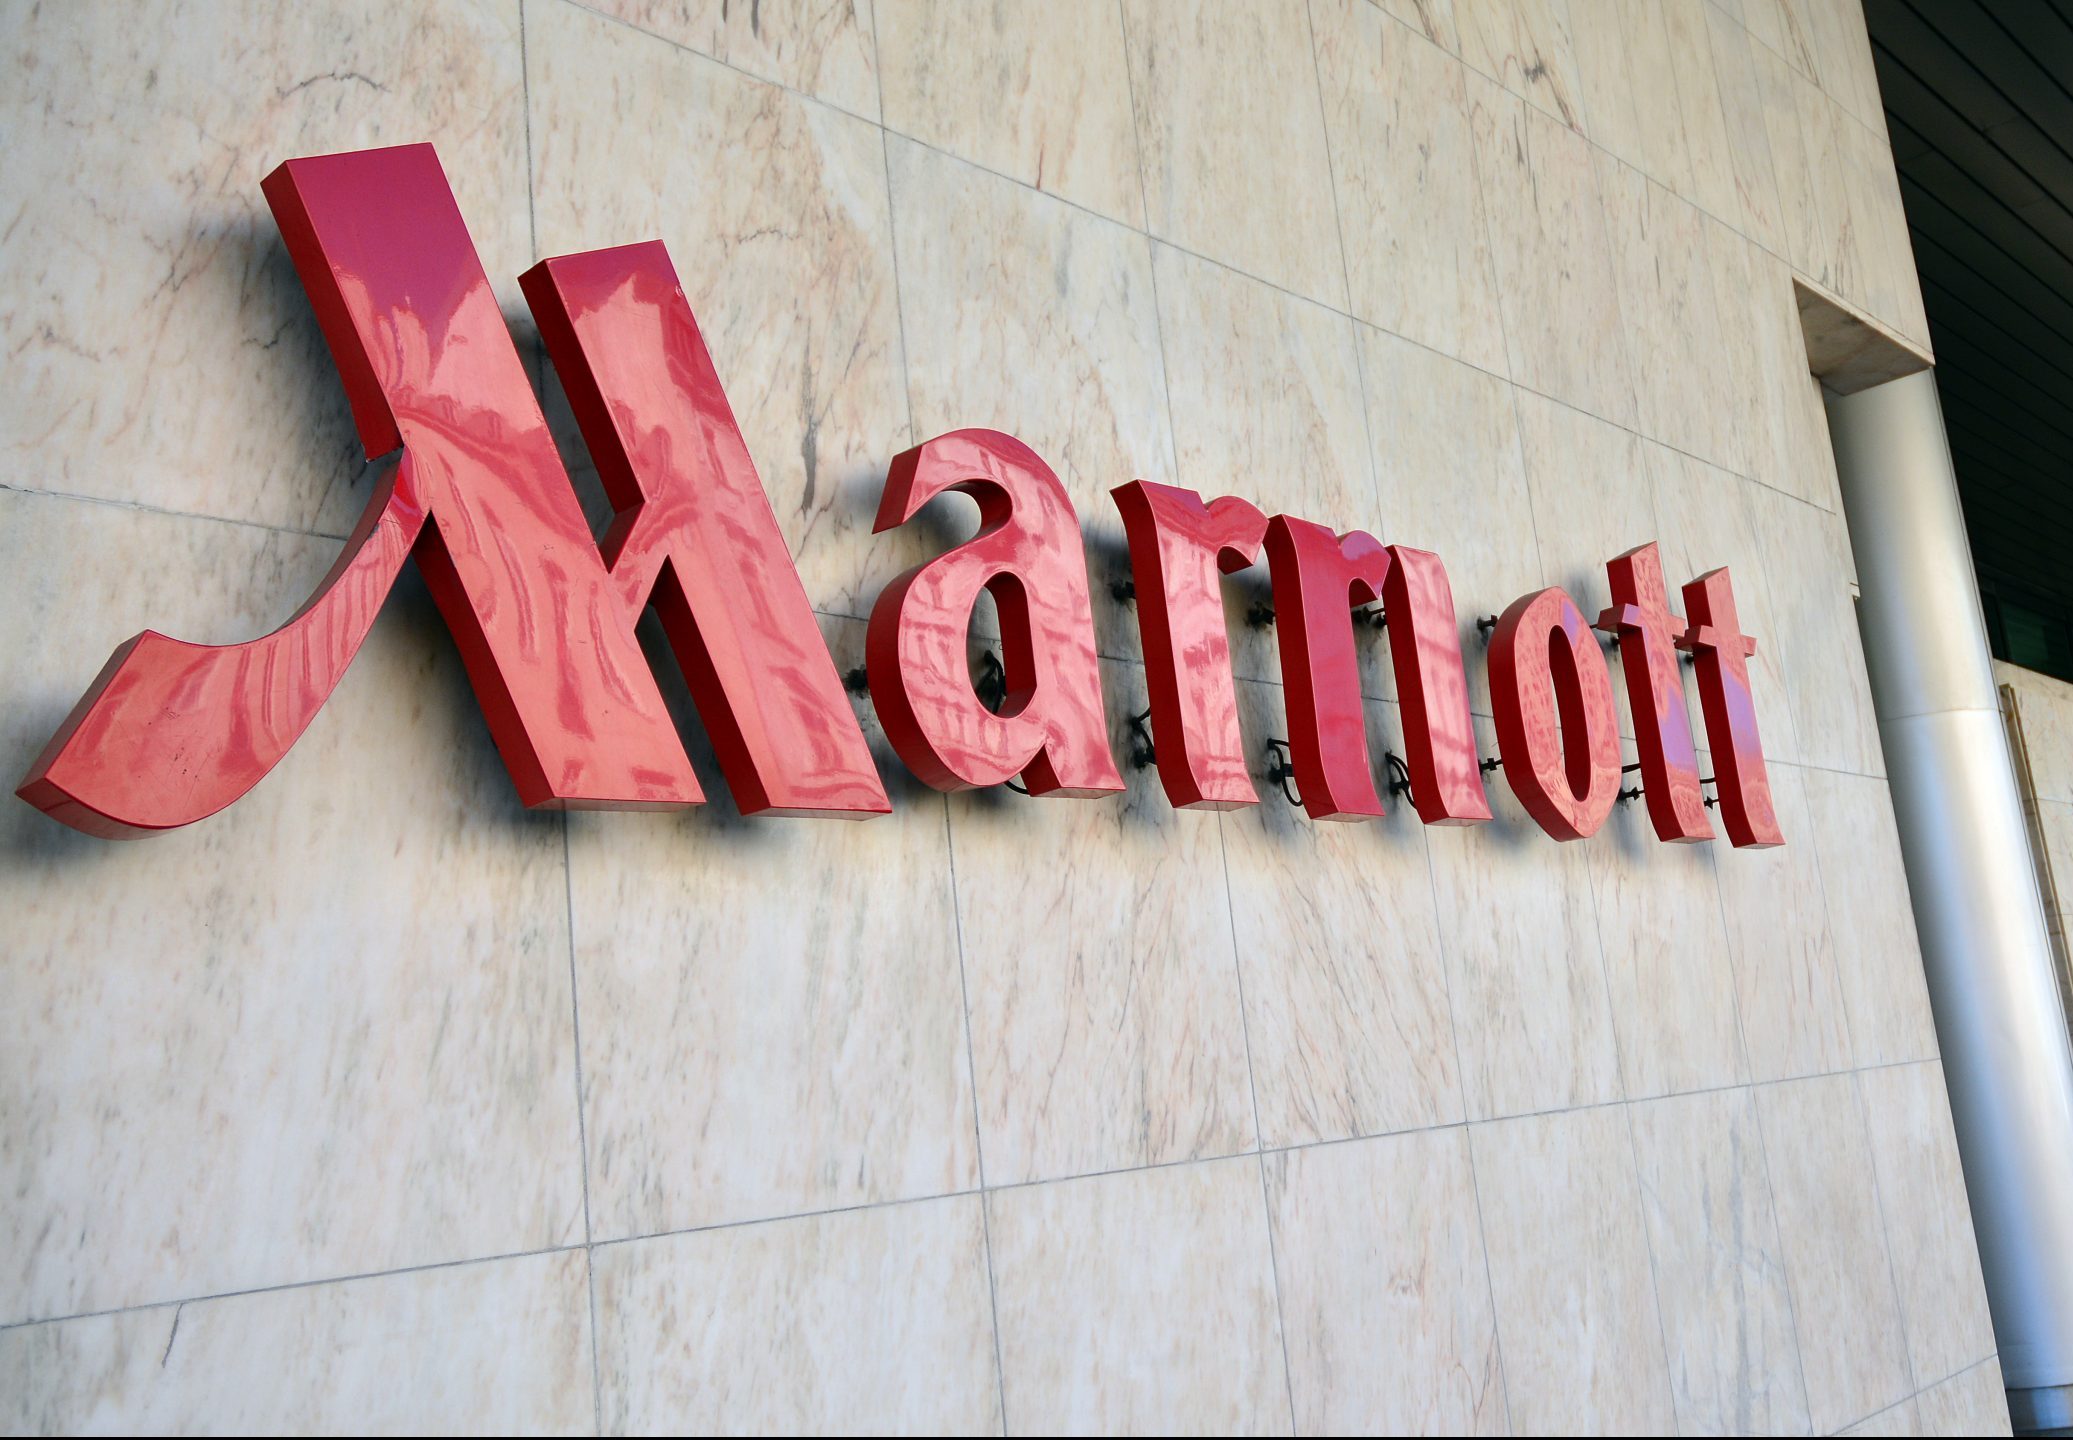 Terminated Marriott Copley workers launch hotel boycott - The